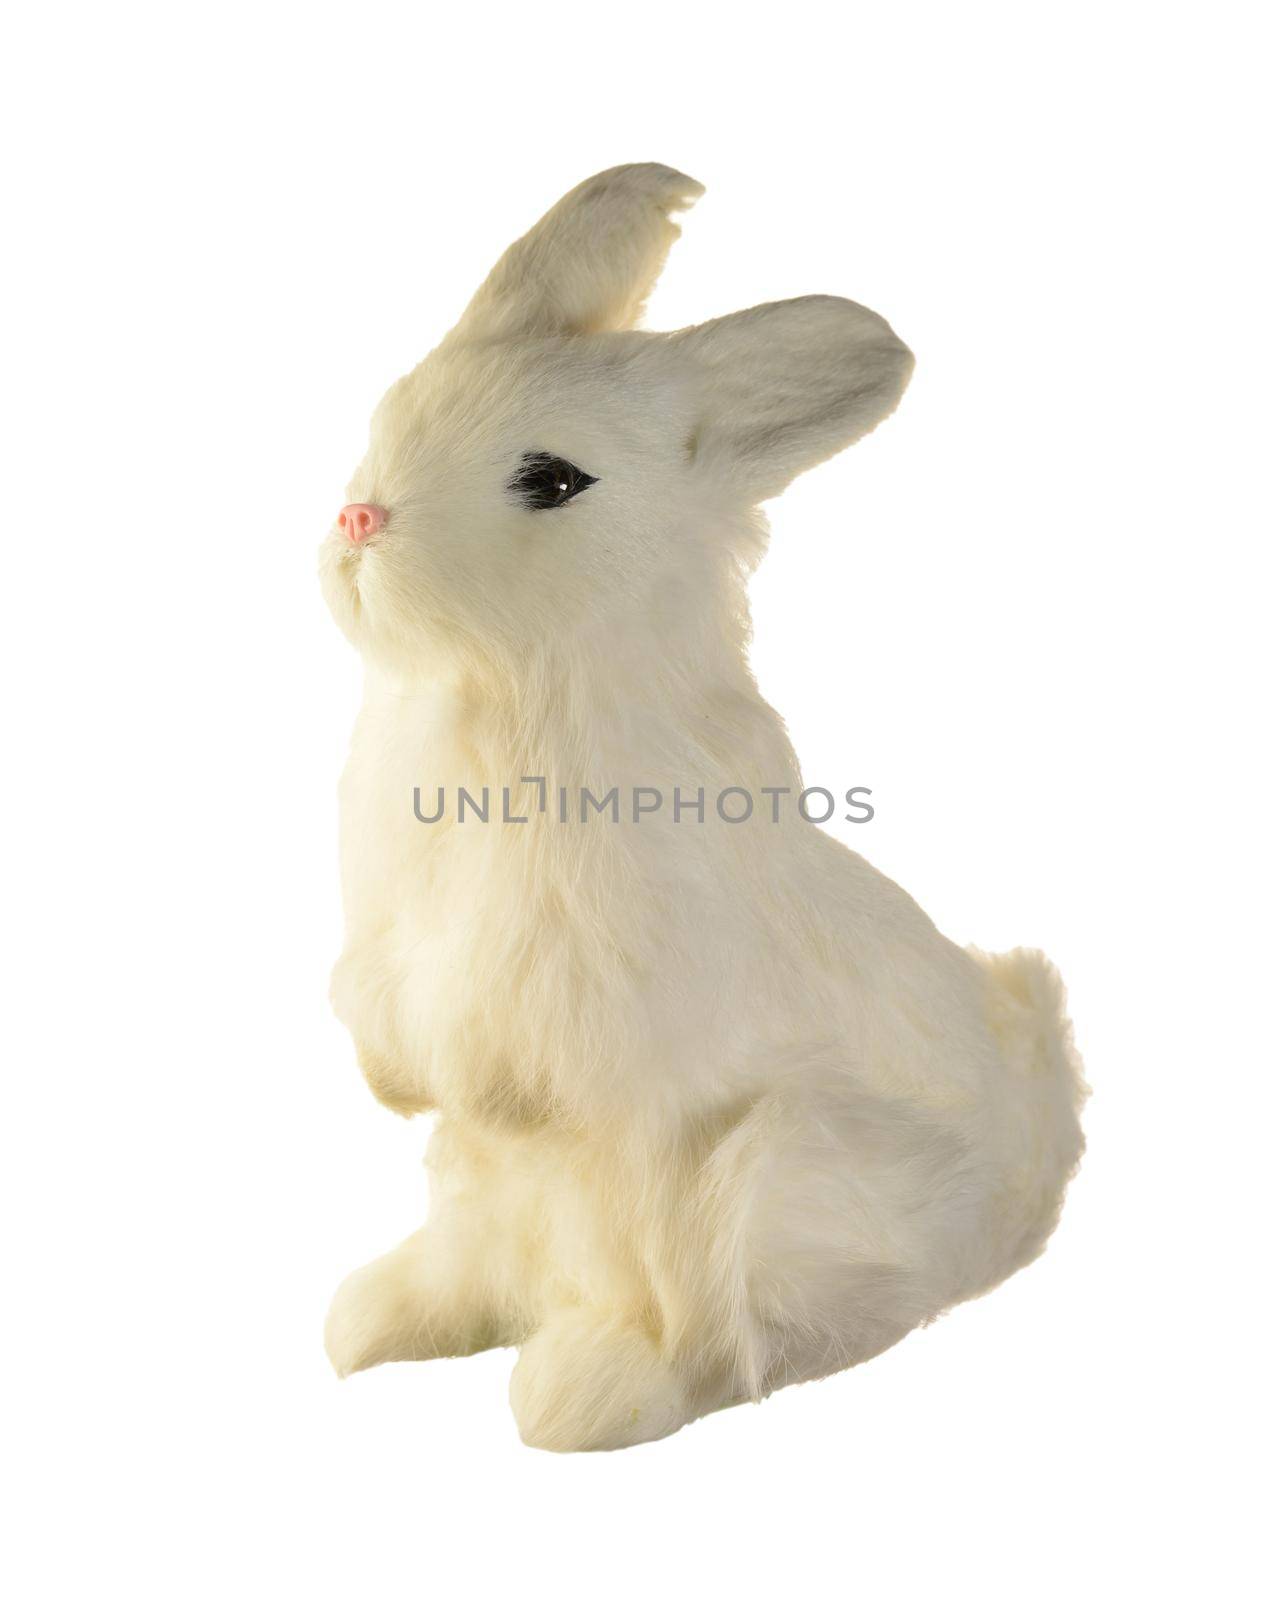 An isolated white rabbit over a clean bright background.